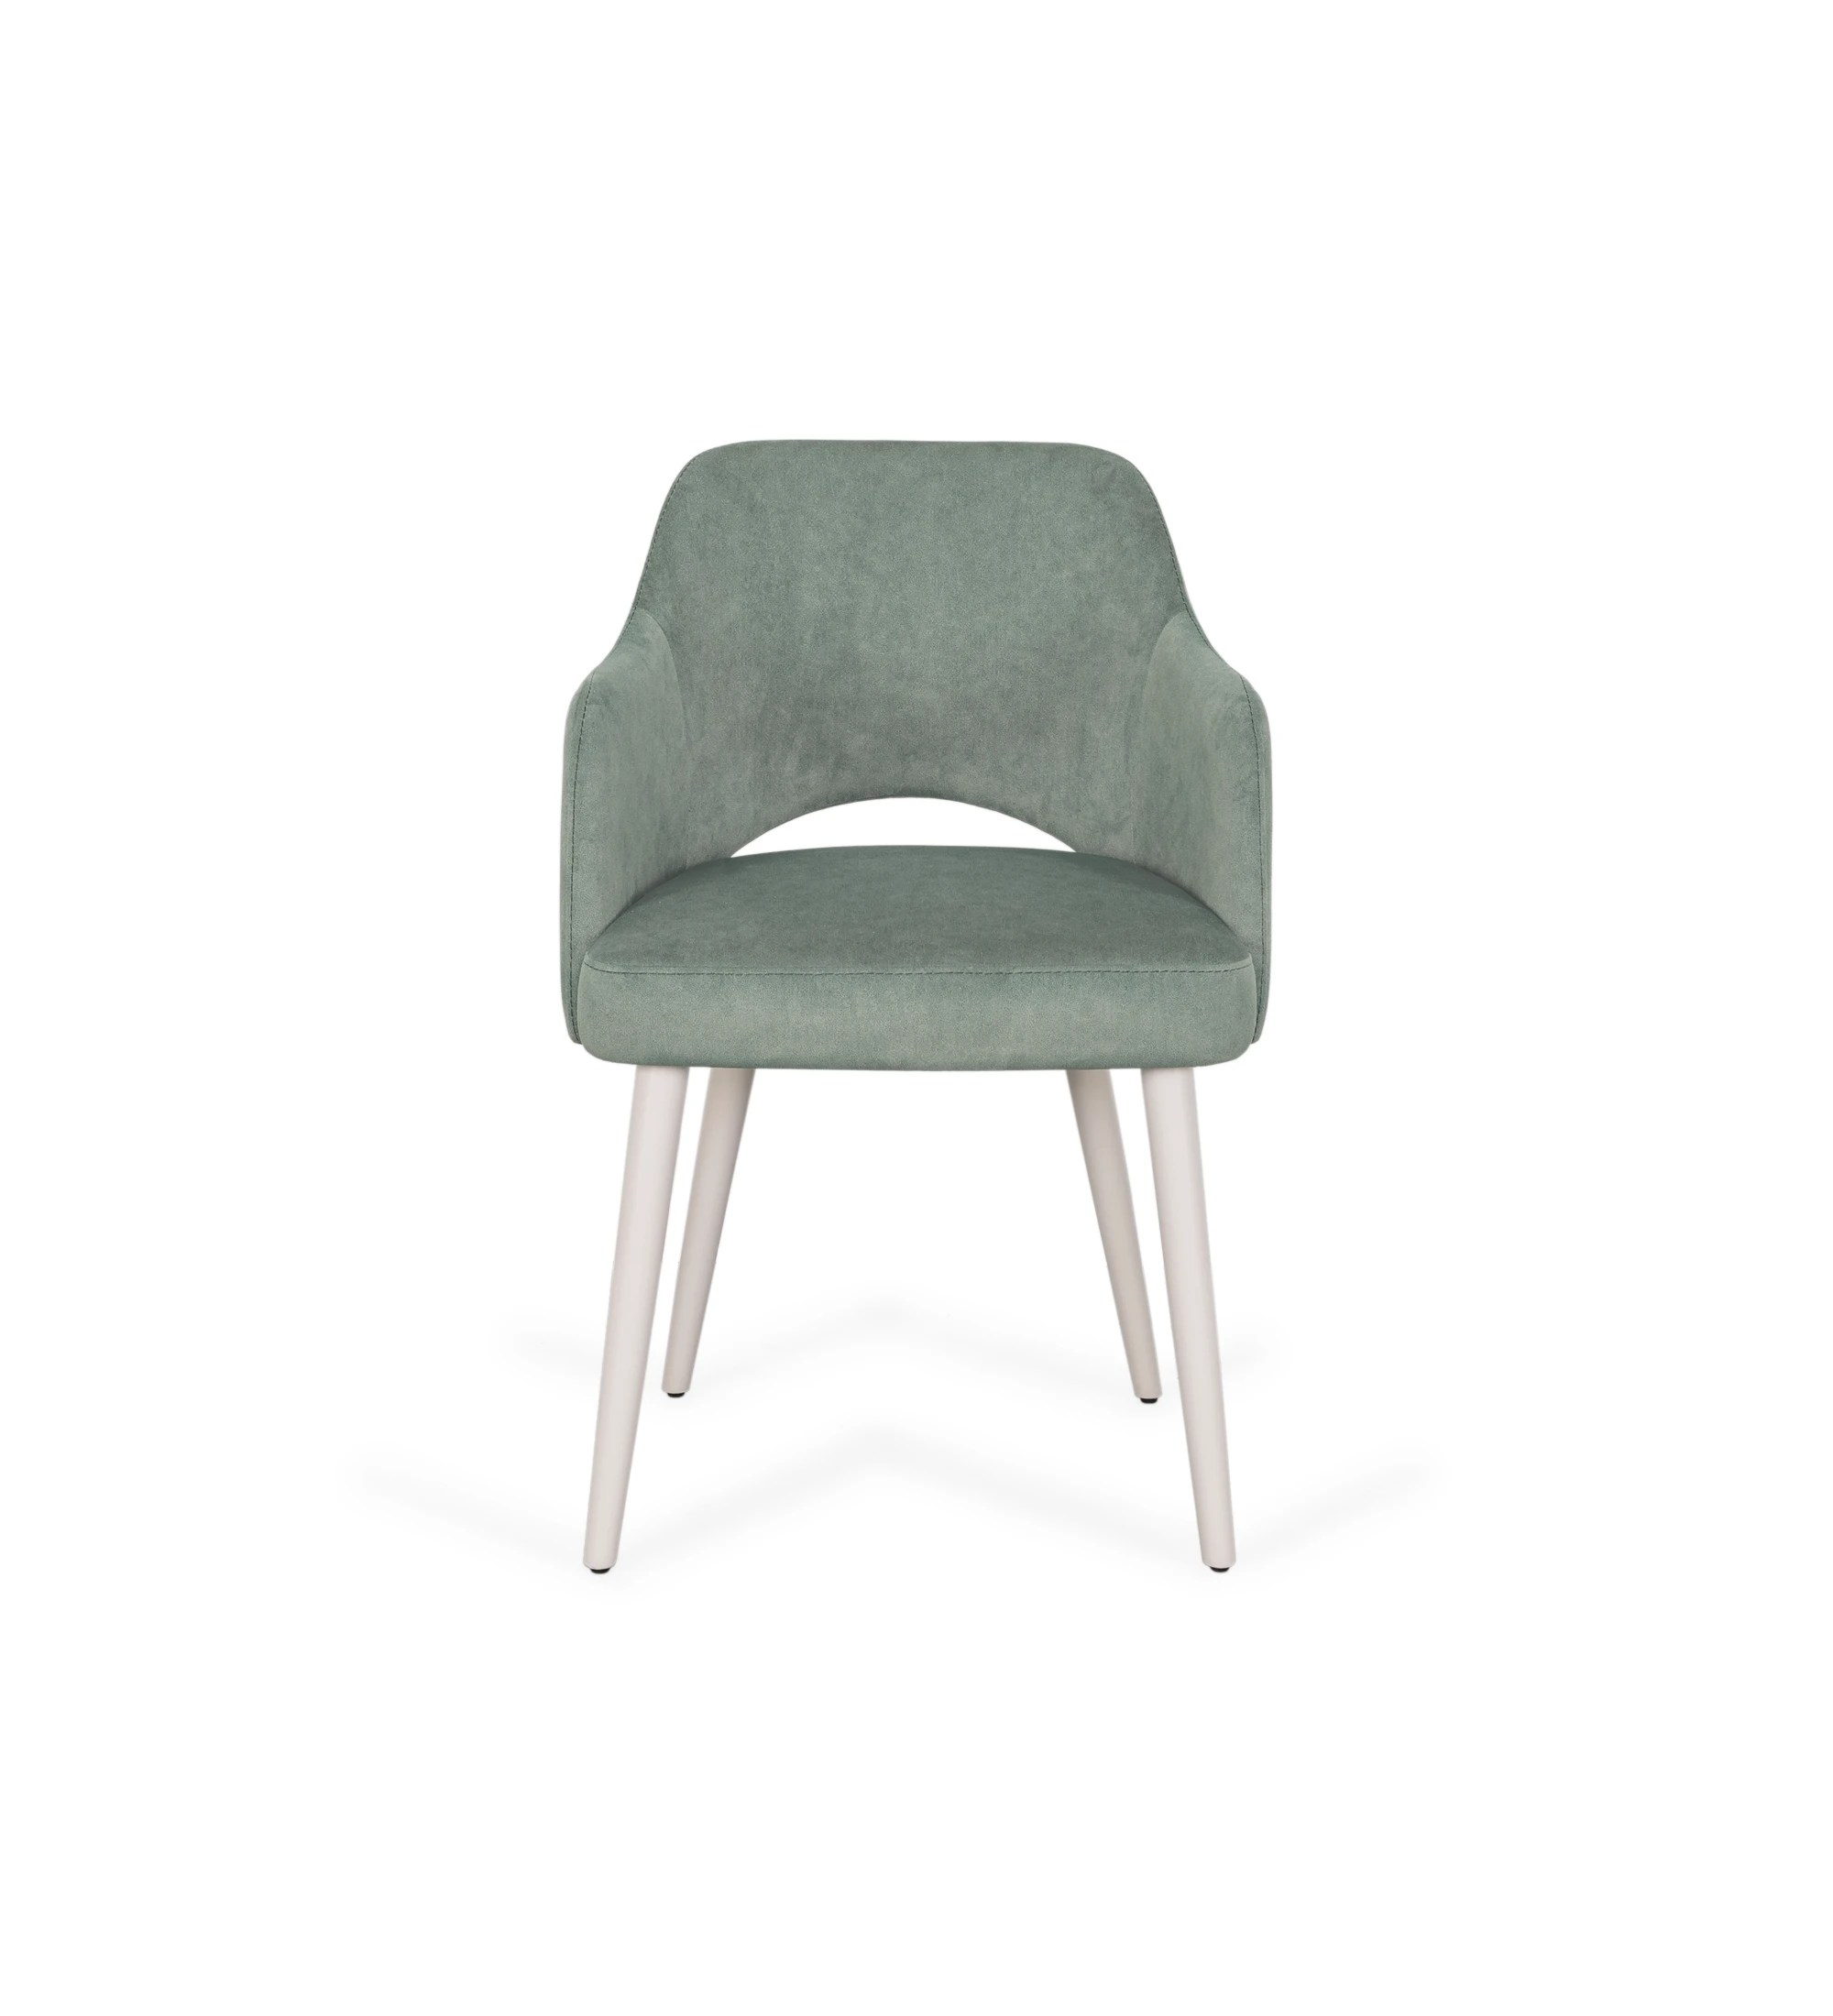 Londres chair with arms upholstered in water green fabric, pearl lacquered feet.